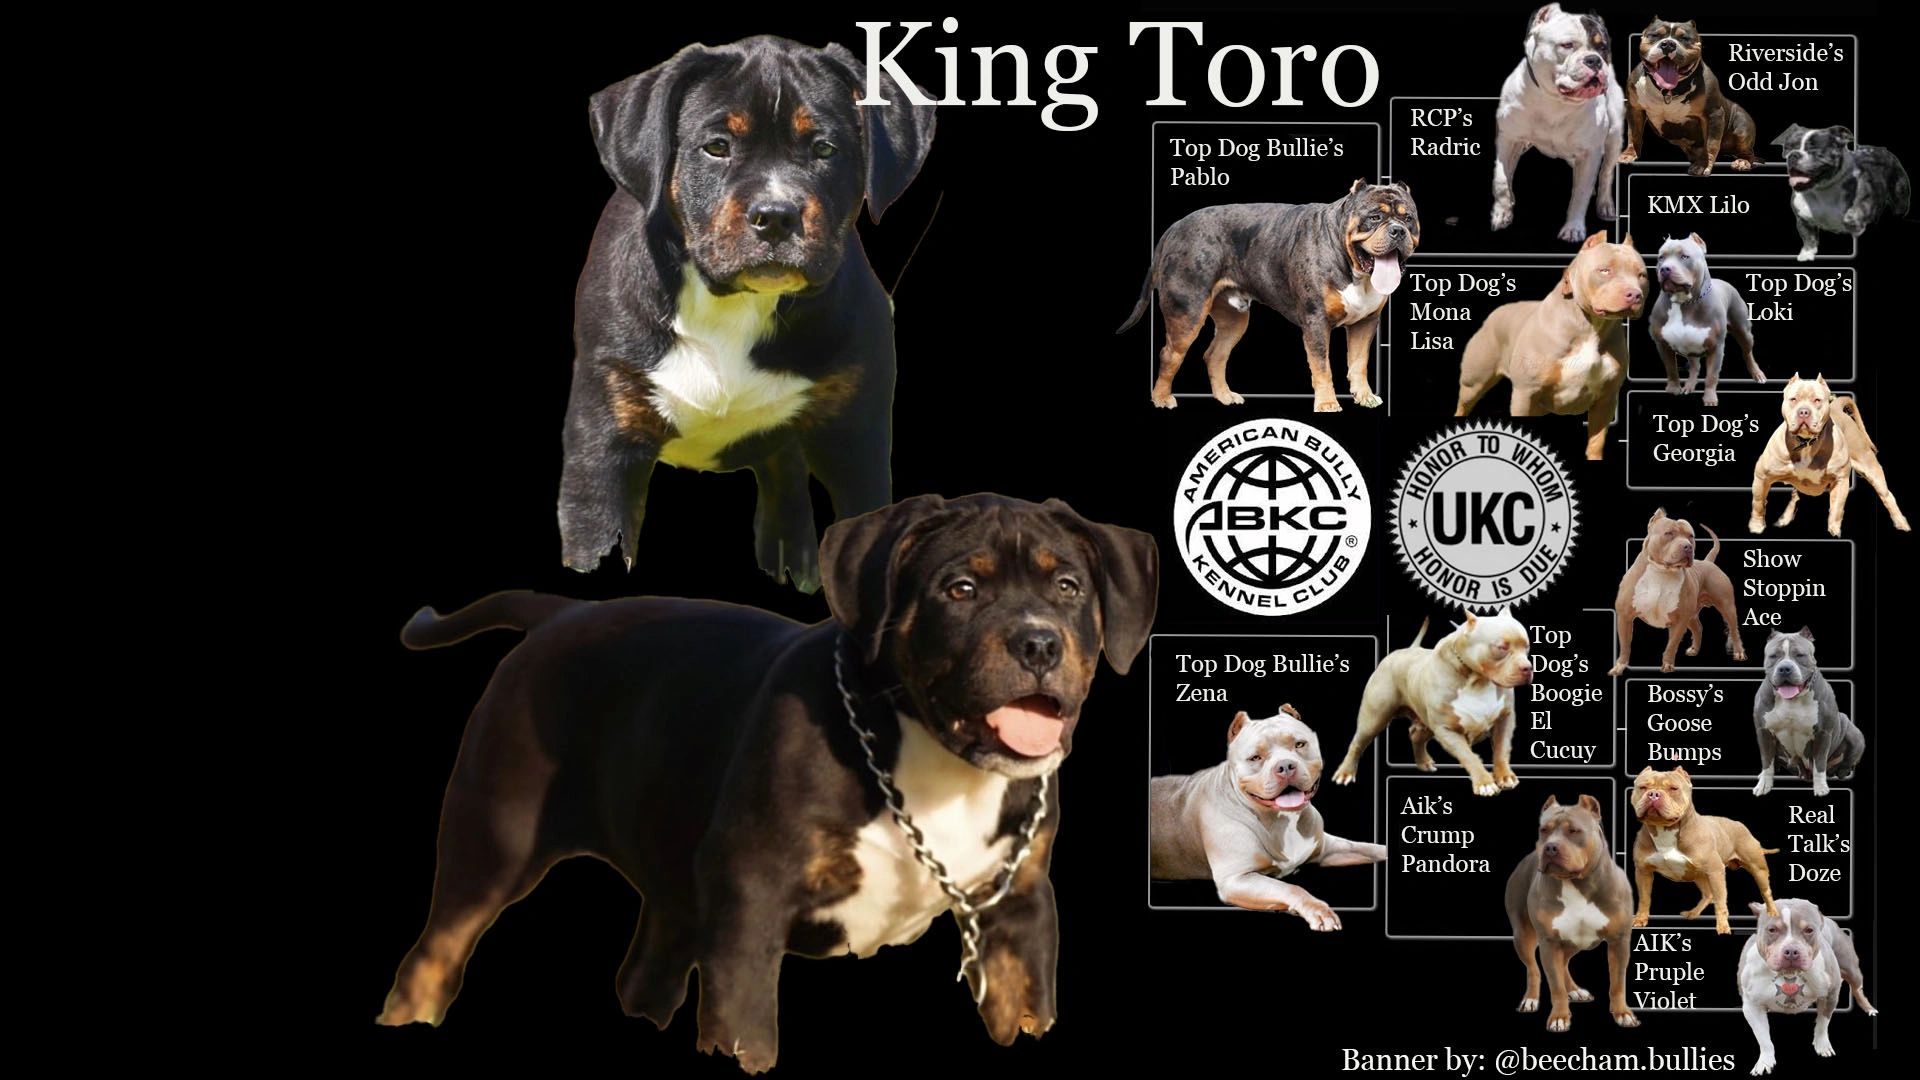 EXQUISITE BULLYS KING TORO 
TRINDLE AMERICAN BULLY
TOPDOGBULLIES BLOODLINE